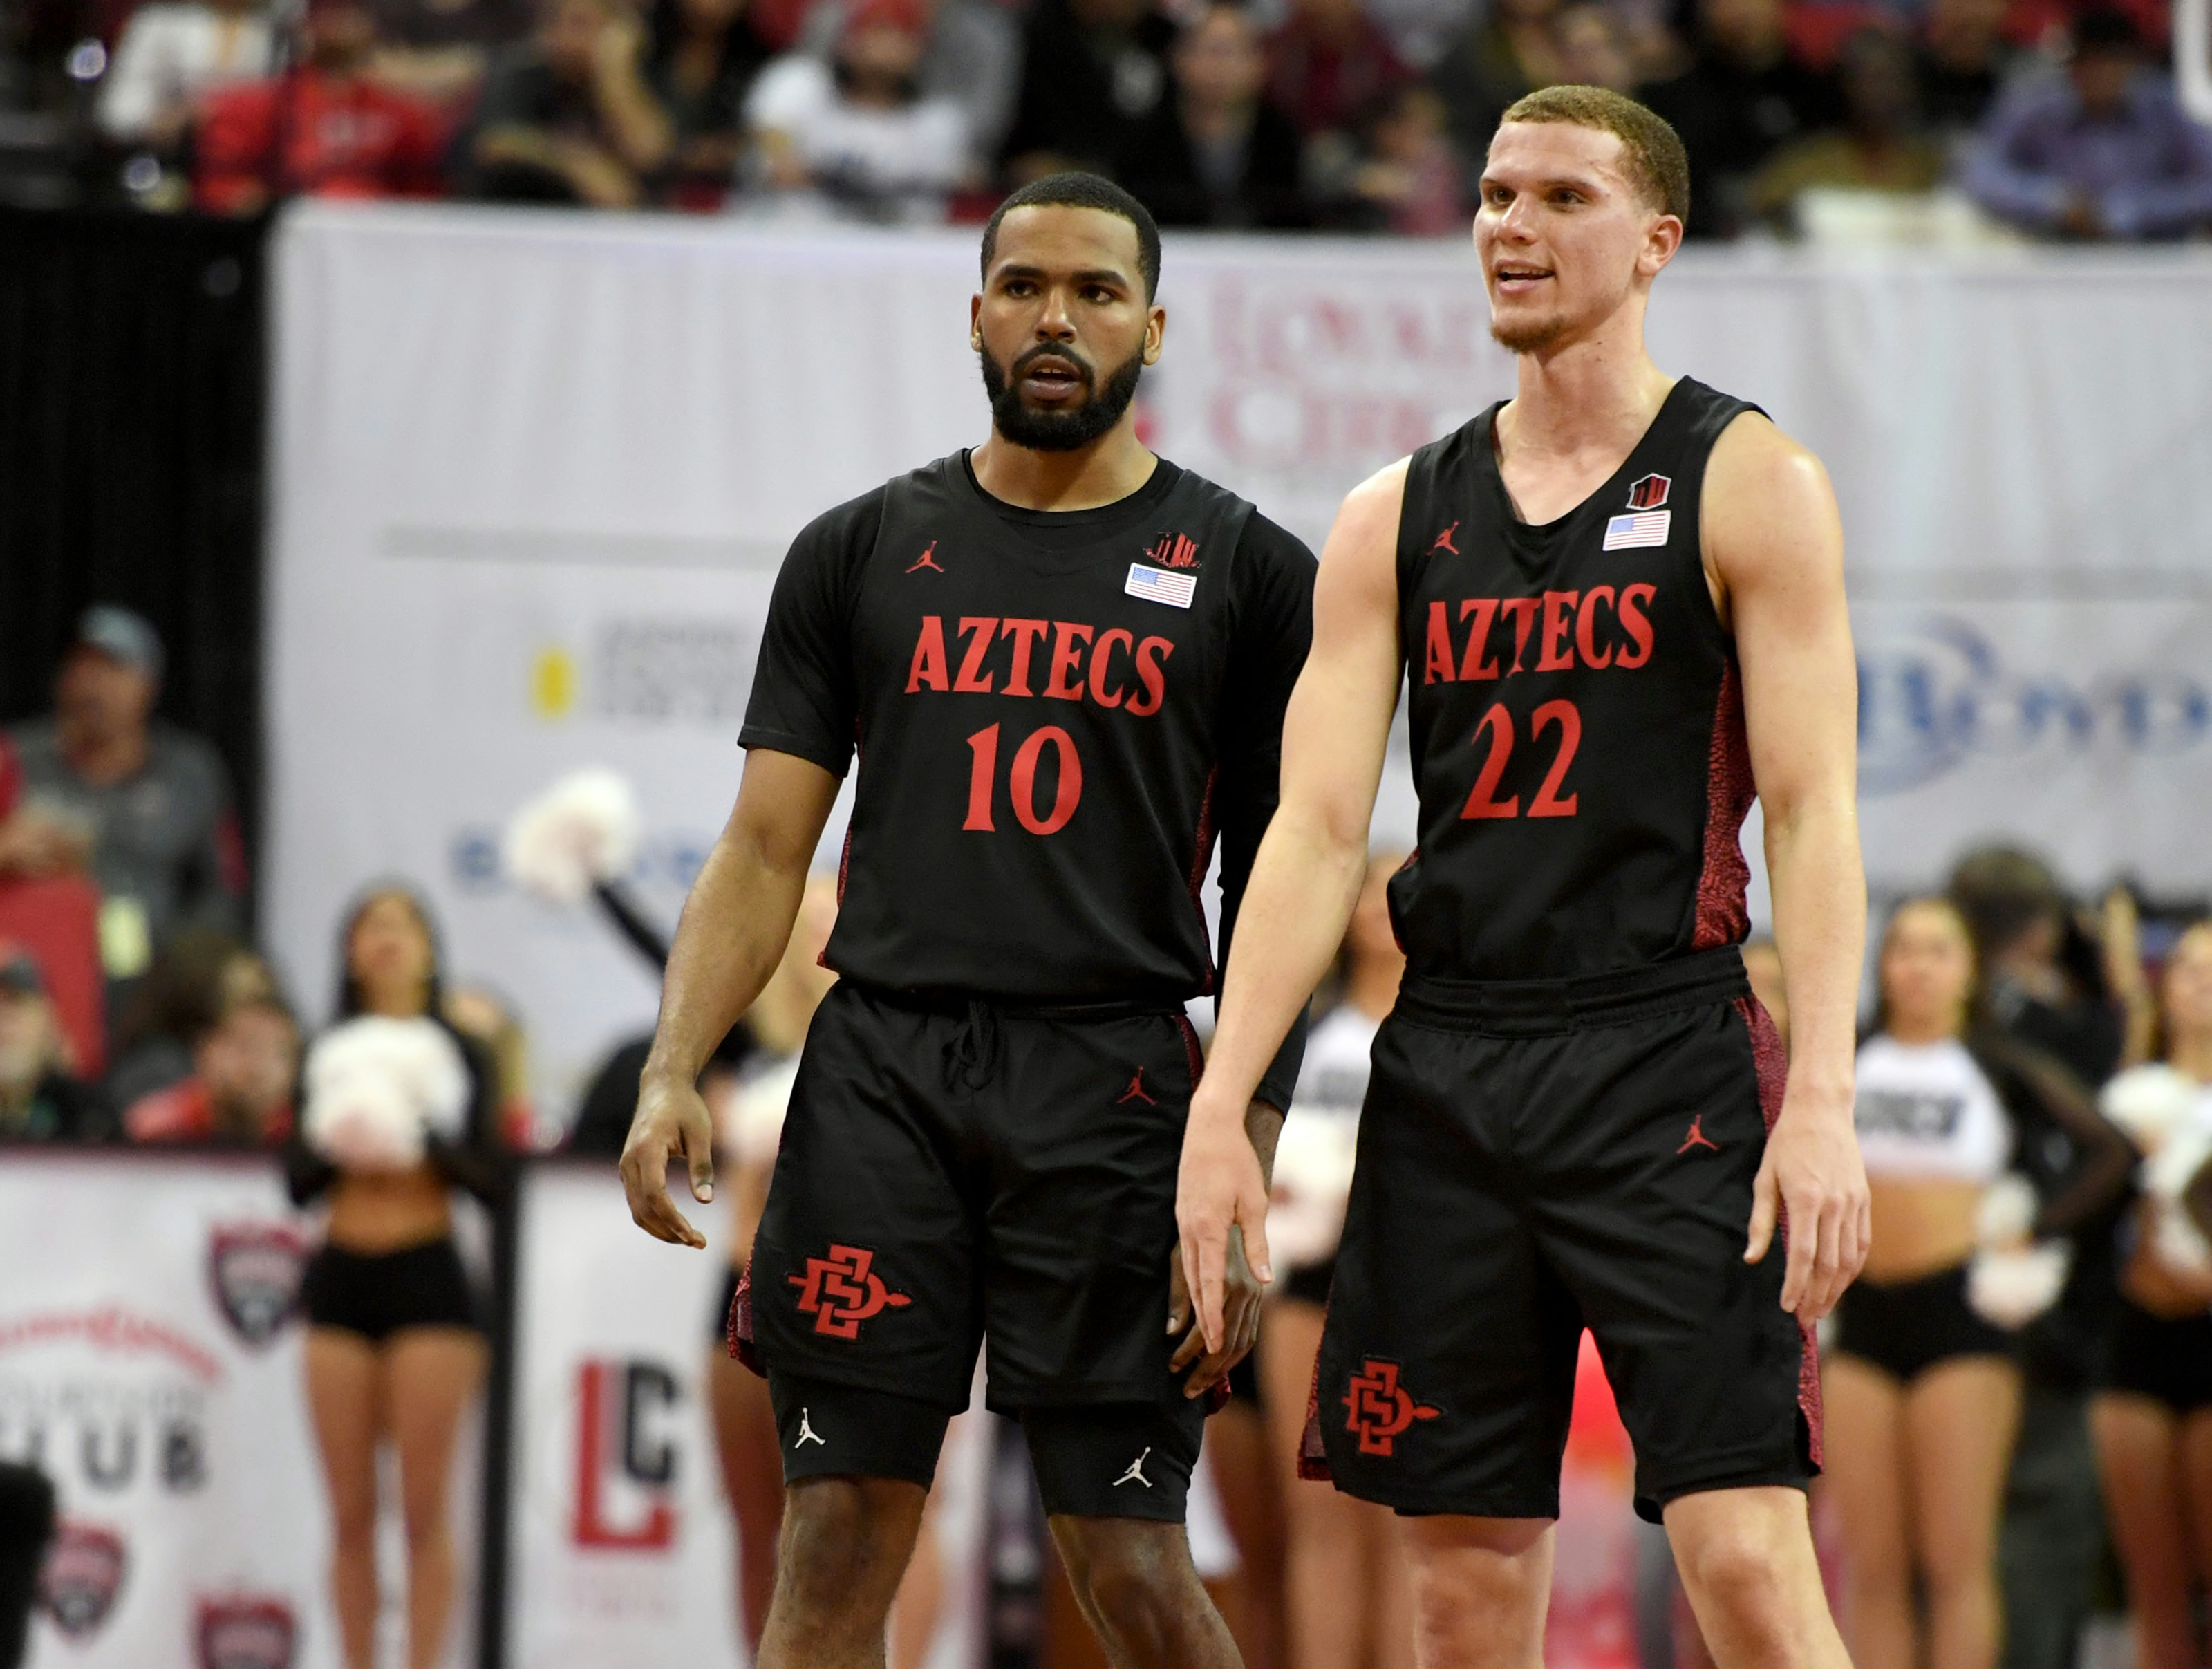 San Diego State Basketball 5 reasons why Aztecs can win 201920 title